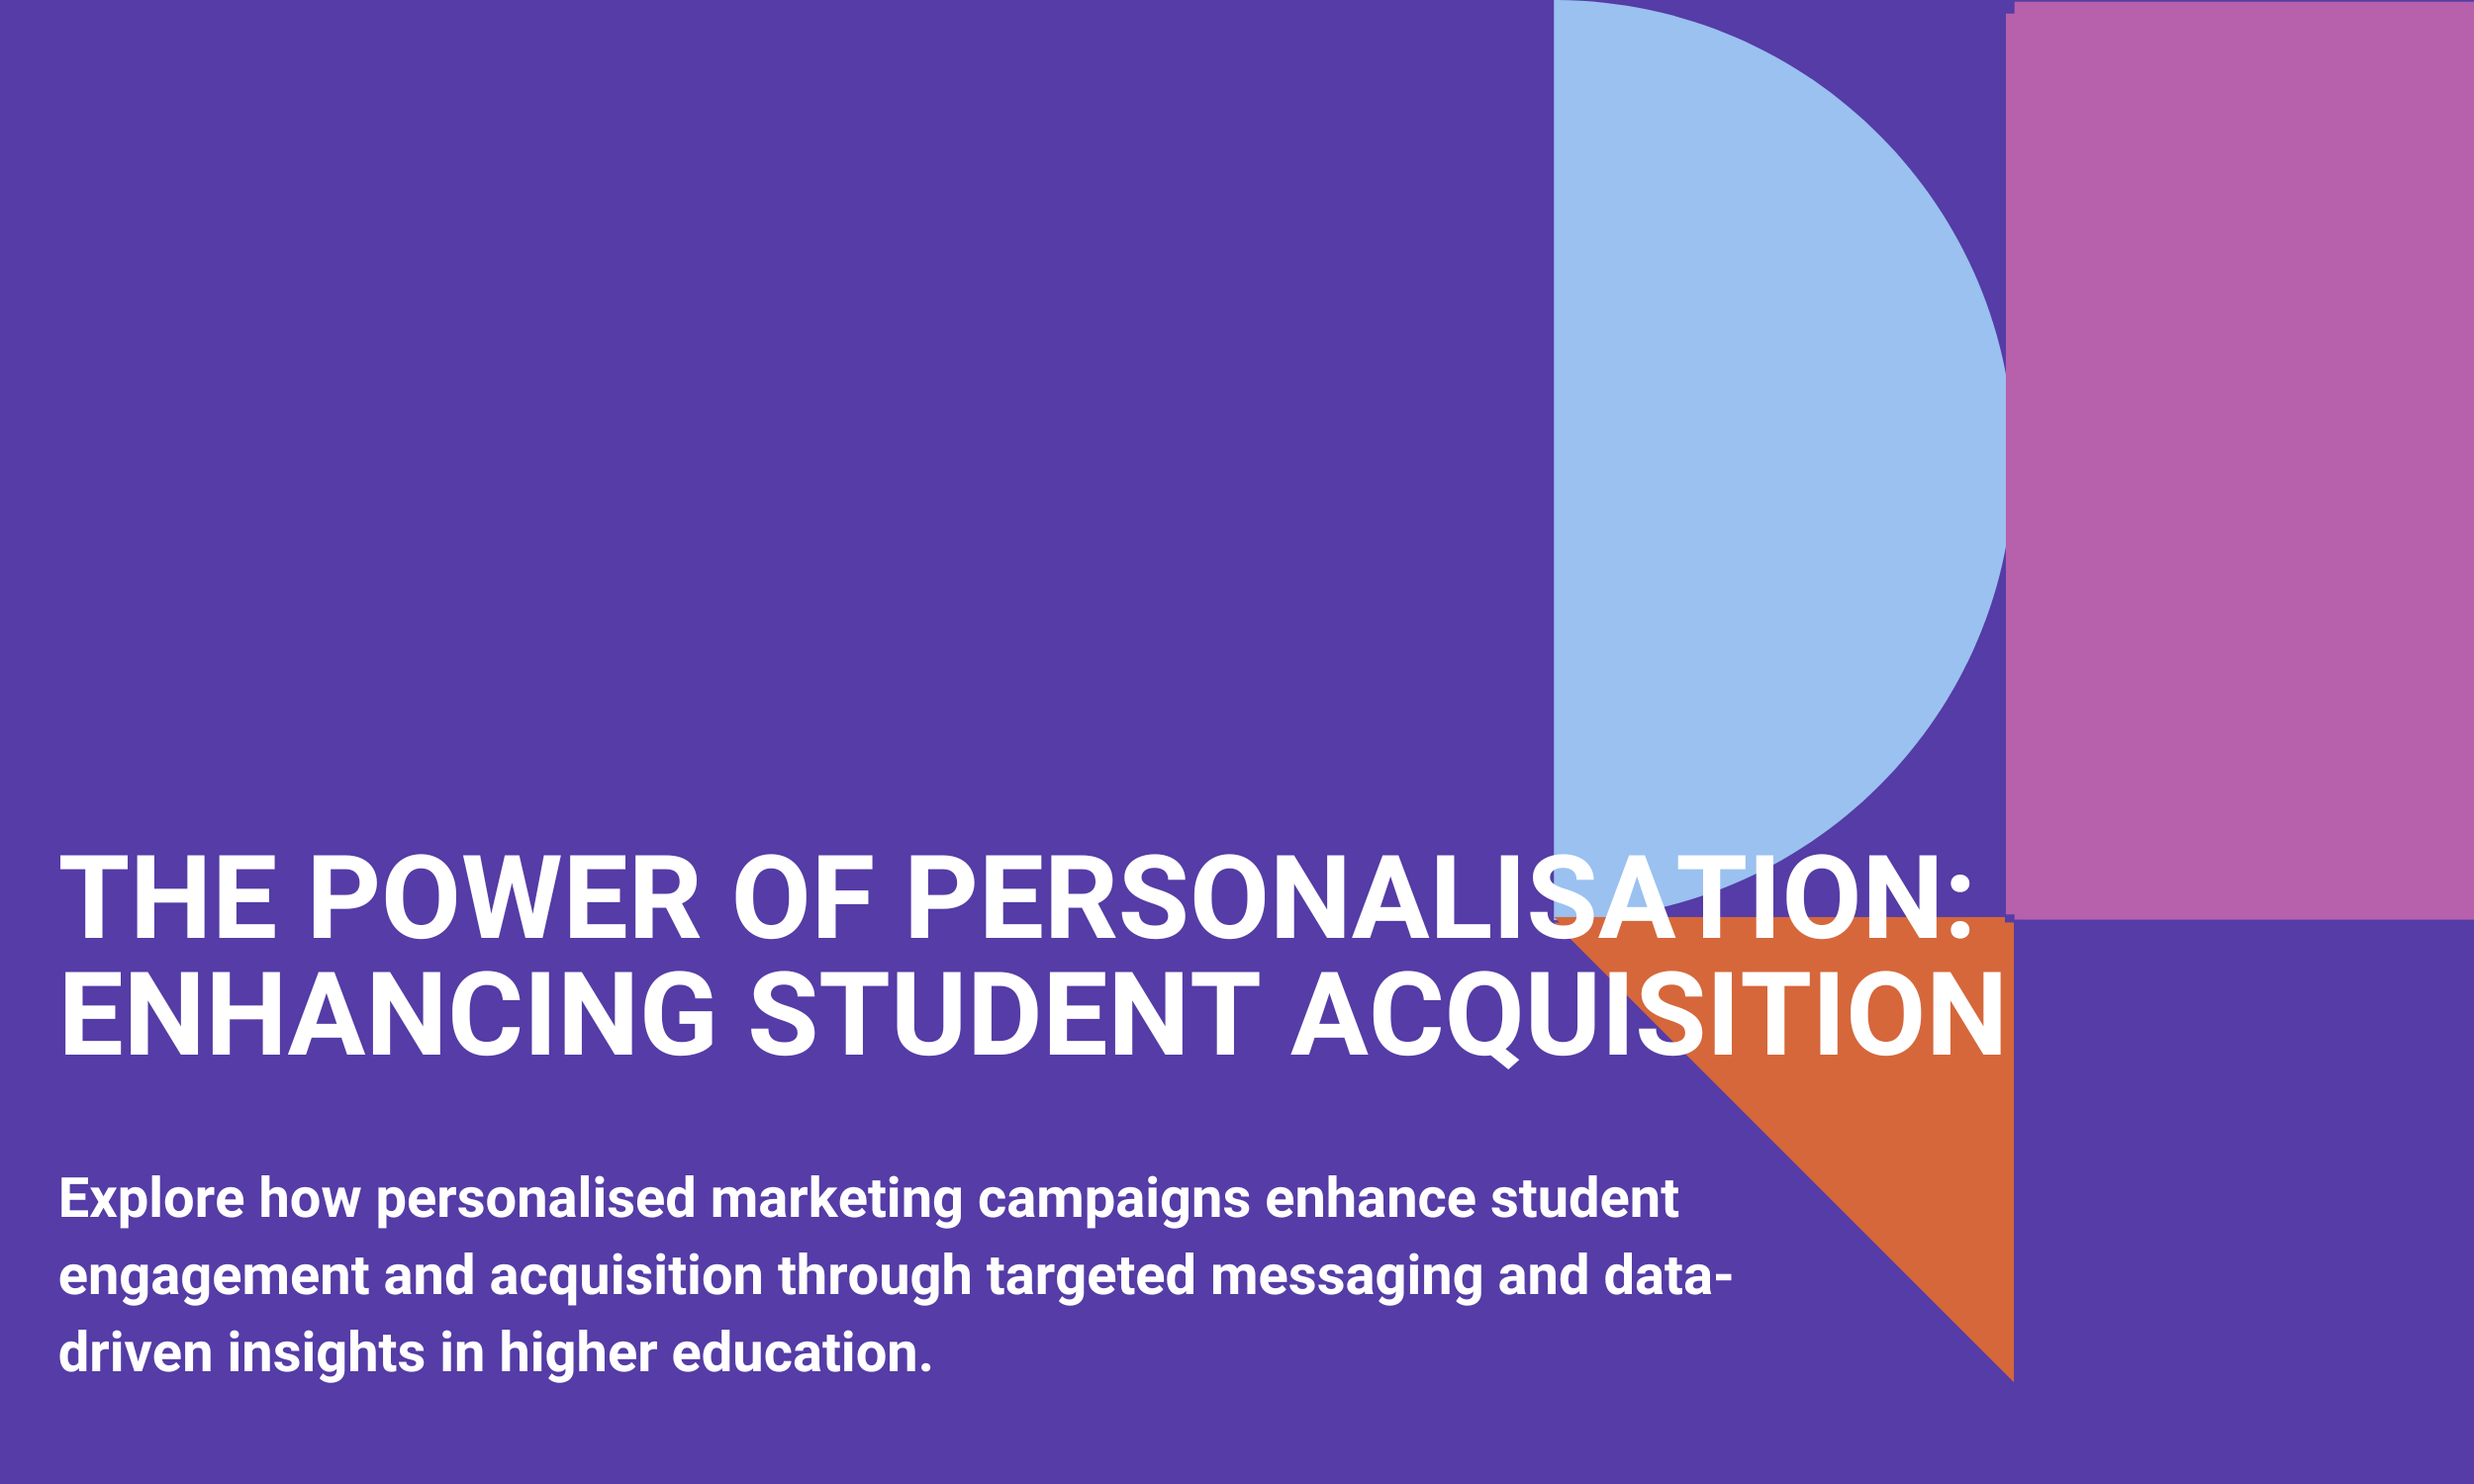 The Power of Personalisation: Enhancing Student Acquisition